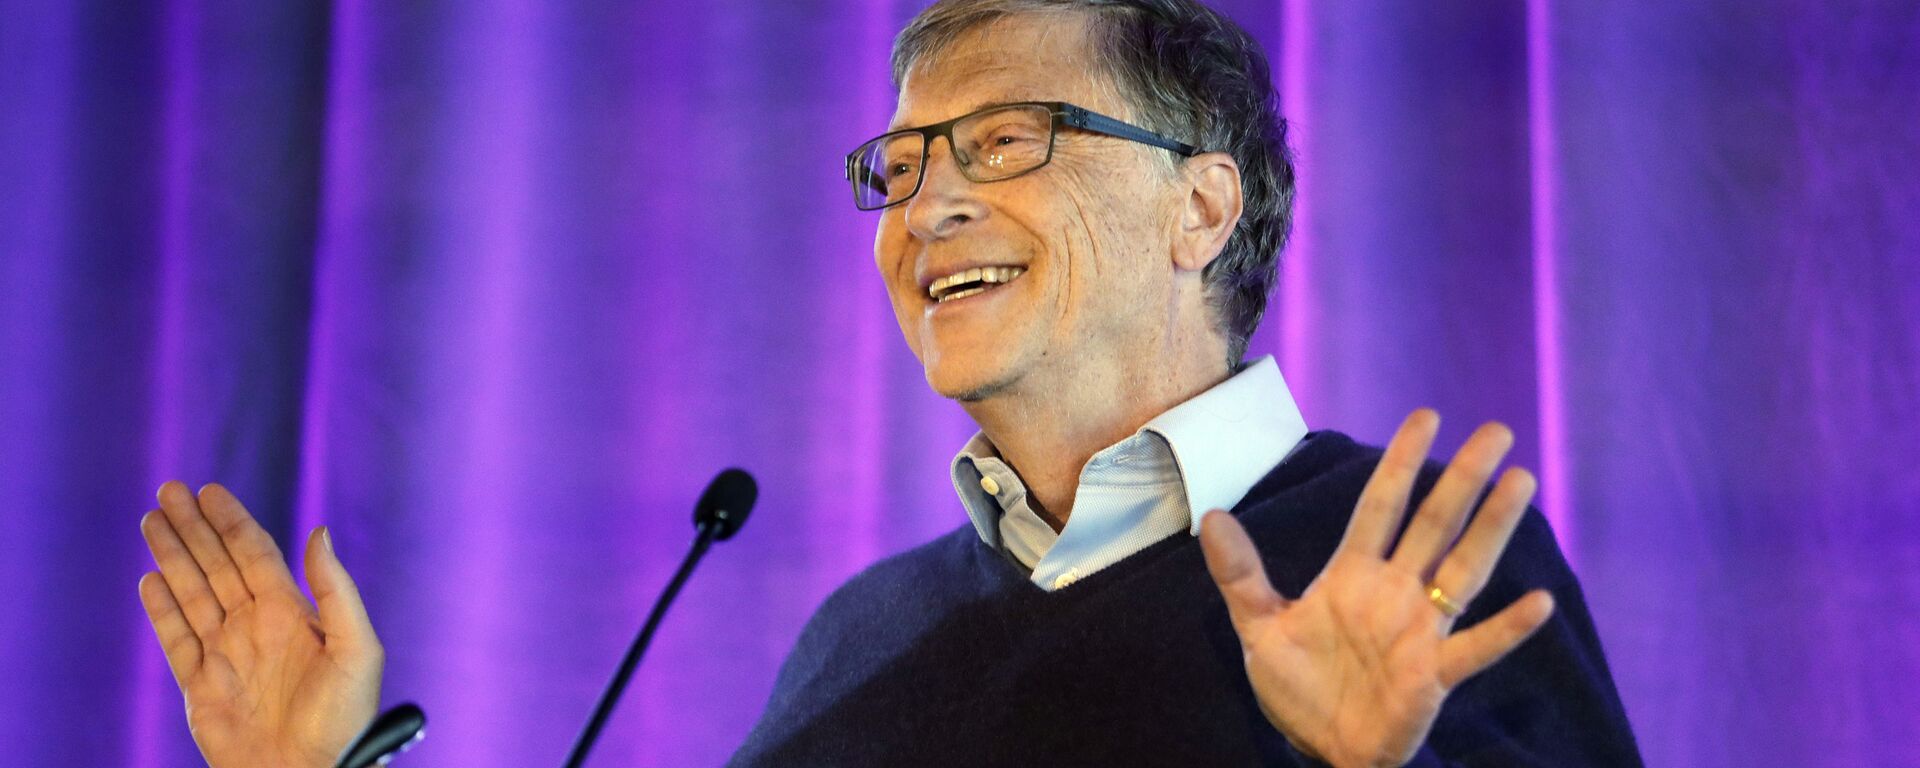 Microsoft co-founder Bill Gates speaks at the opening of the Bill & Melinda Gates Center for Computer Science and Engineering at the University of Washington, Thursday, Feb. 28, 2019, in Seattle - Sputnik International, 1920, 02.03.2023